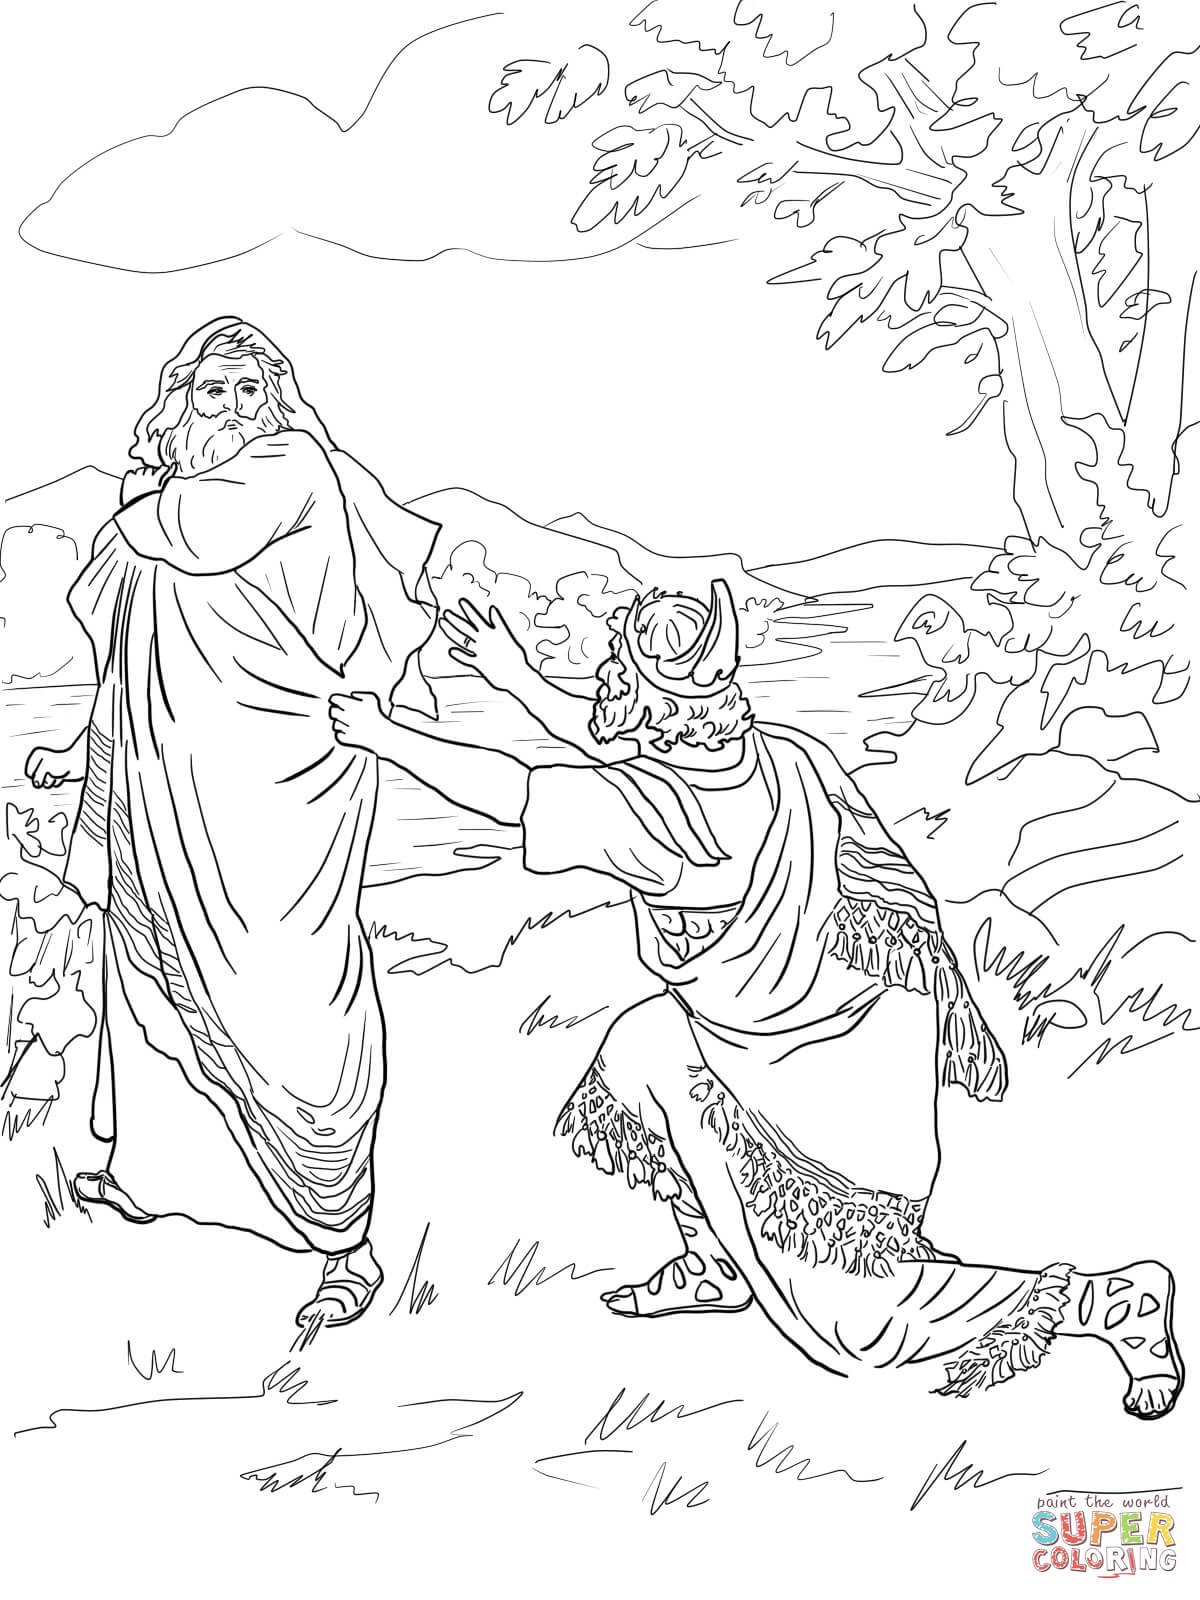 Hannah Bible Story Coloring Page - Coloring Home